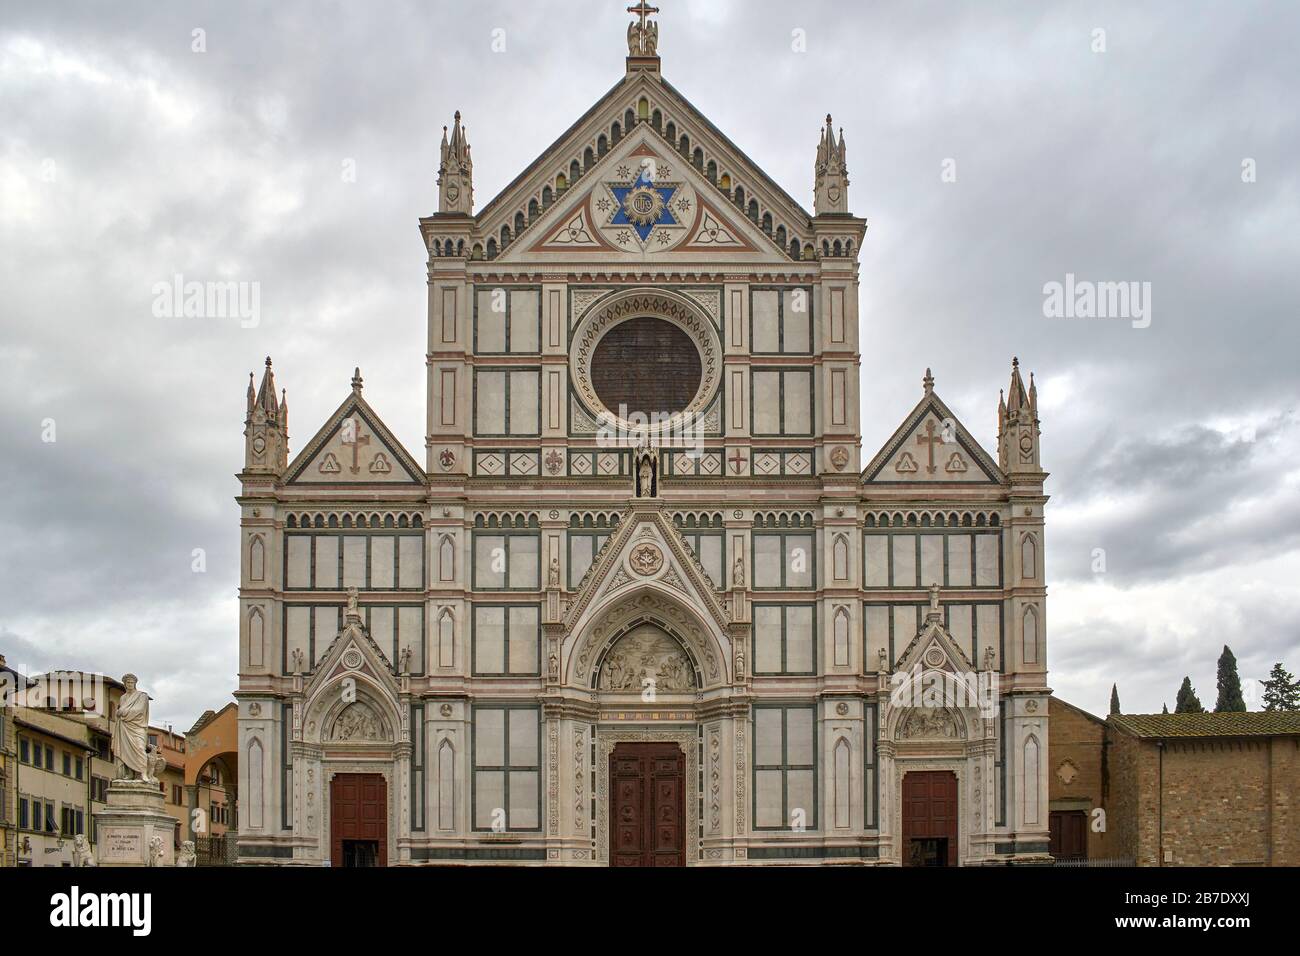 FLORENCE ITALY SANTA CROCE CHURCH EXTERIOR FRONT OF THE FRANCISCAN BASILICA STATUE OF DANTE ON THE LEFT Stock Photo